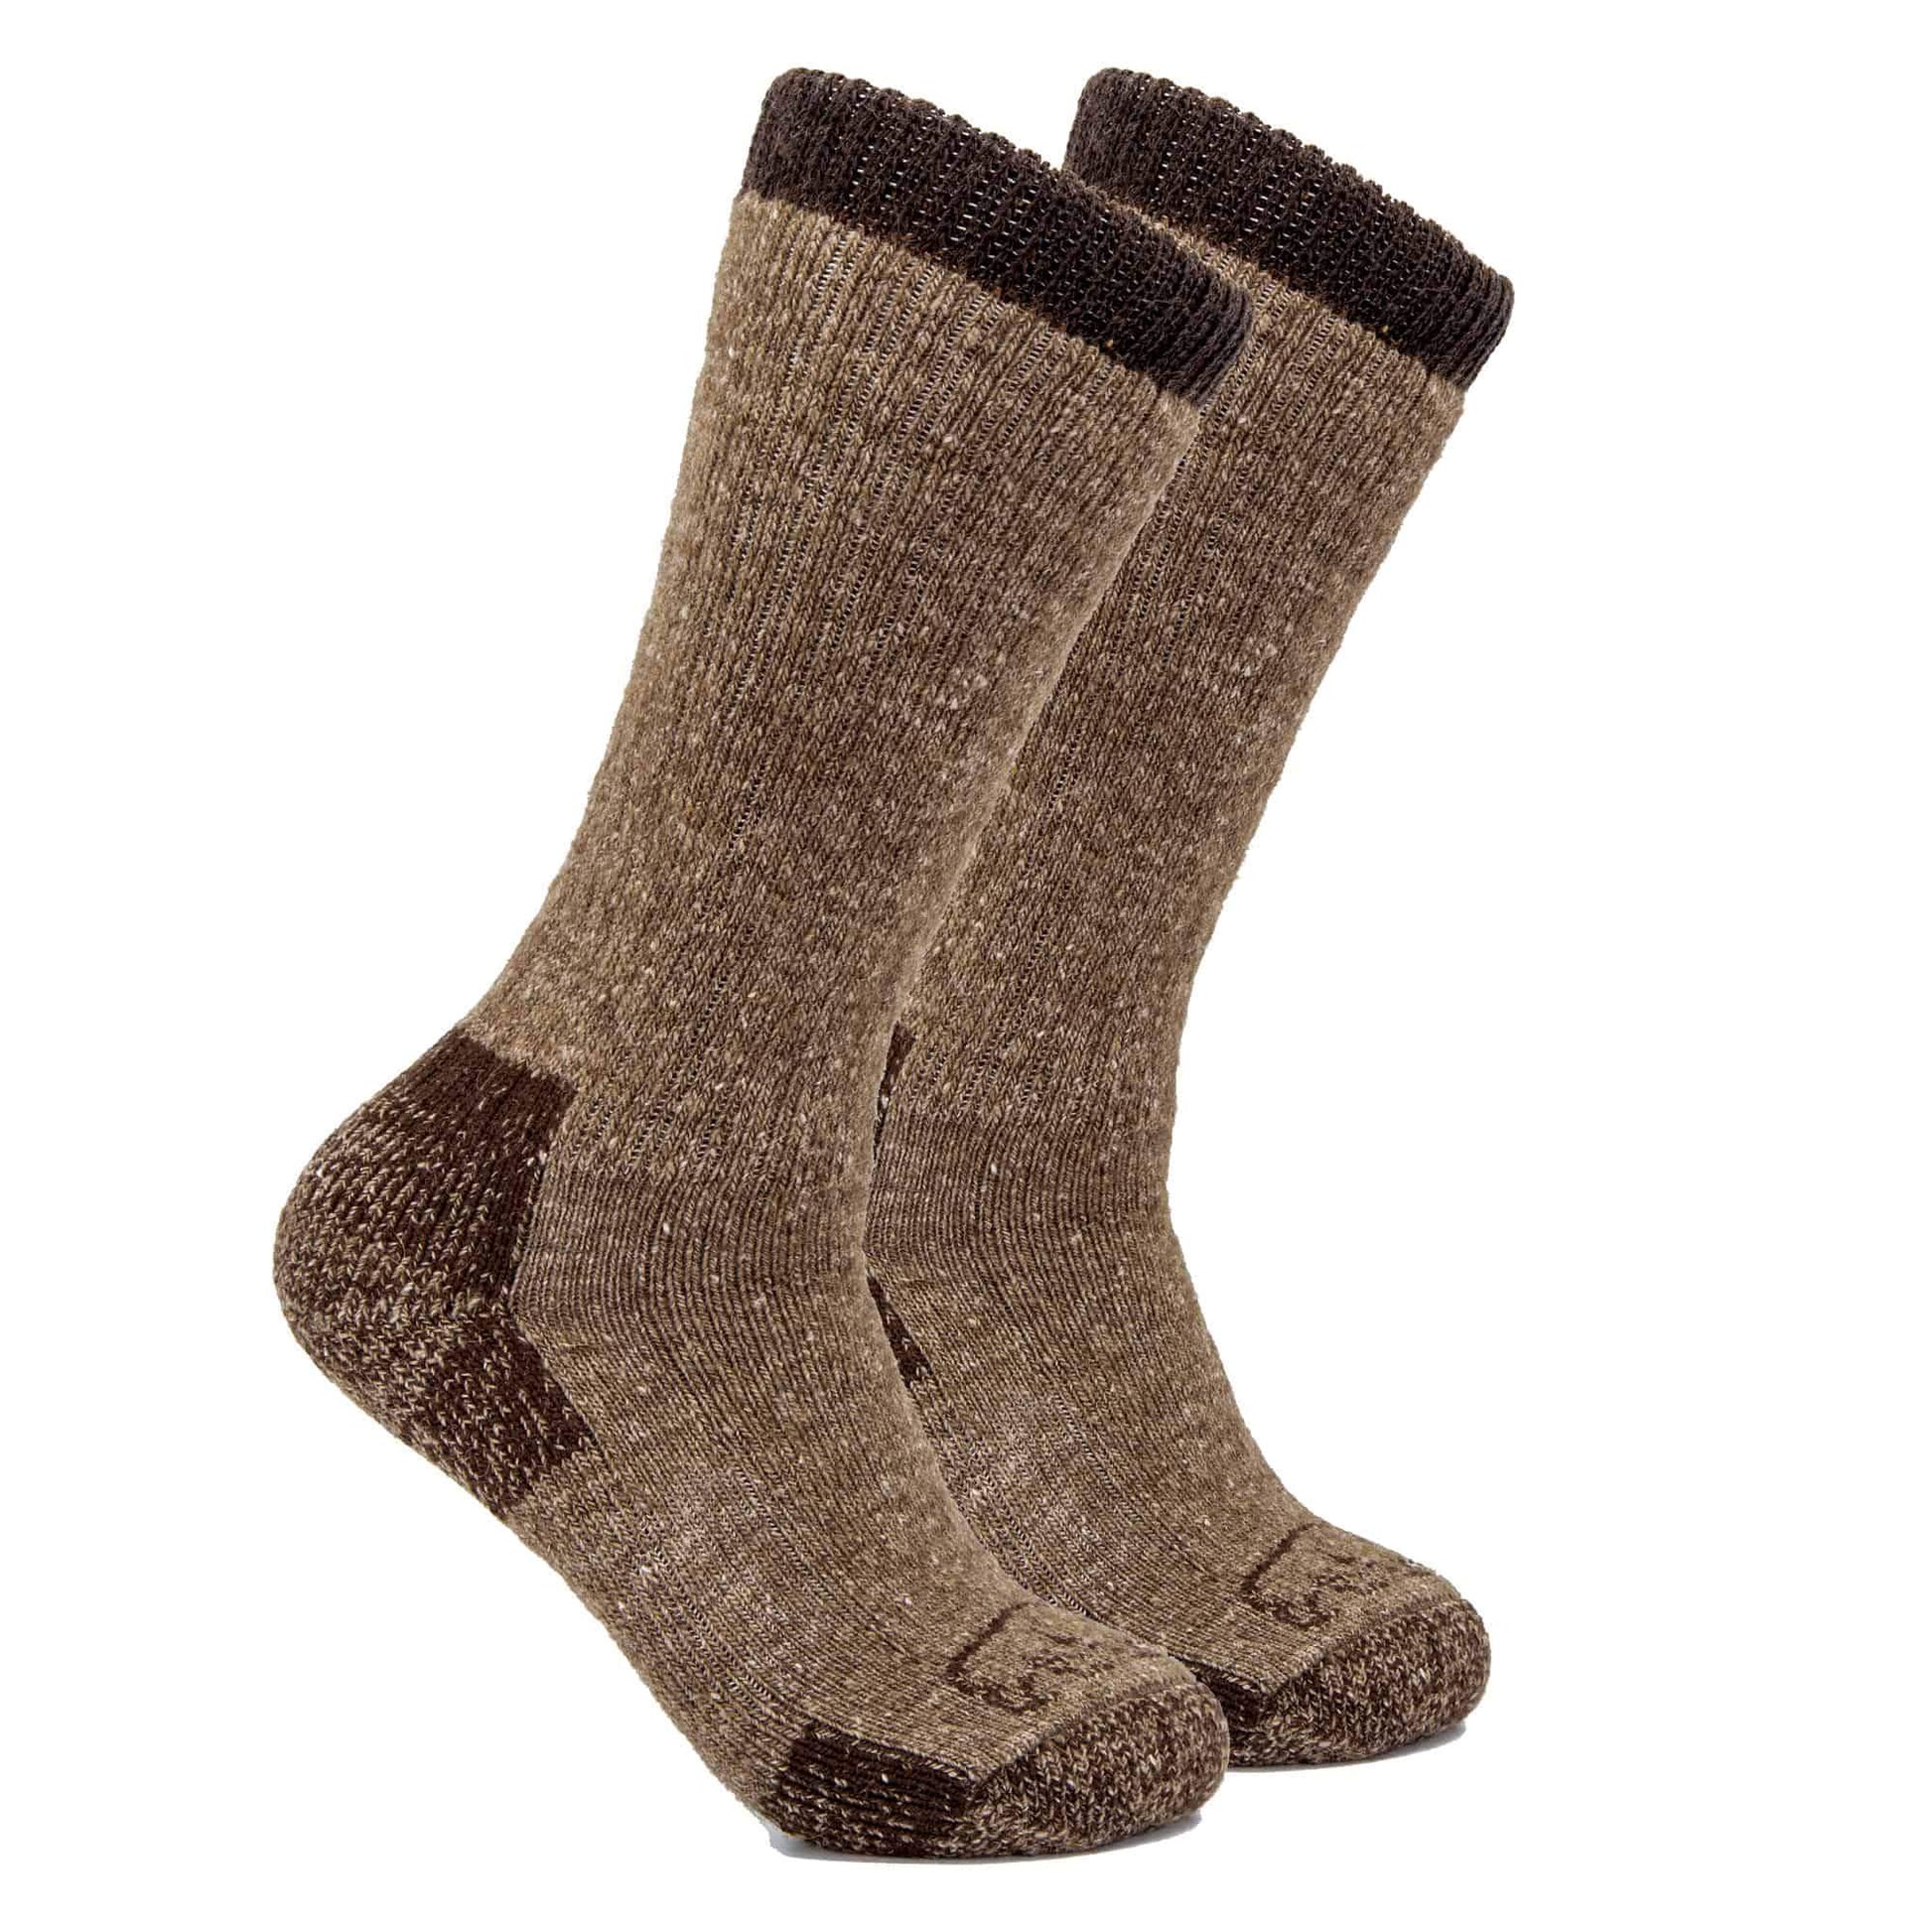 Blue Mountain Men's Cushioned Crew Socks, 5 Pair at Tractor Supply Co.